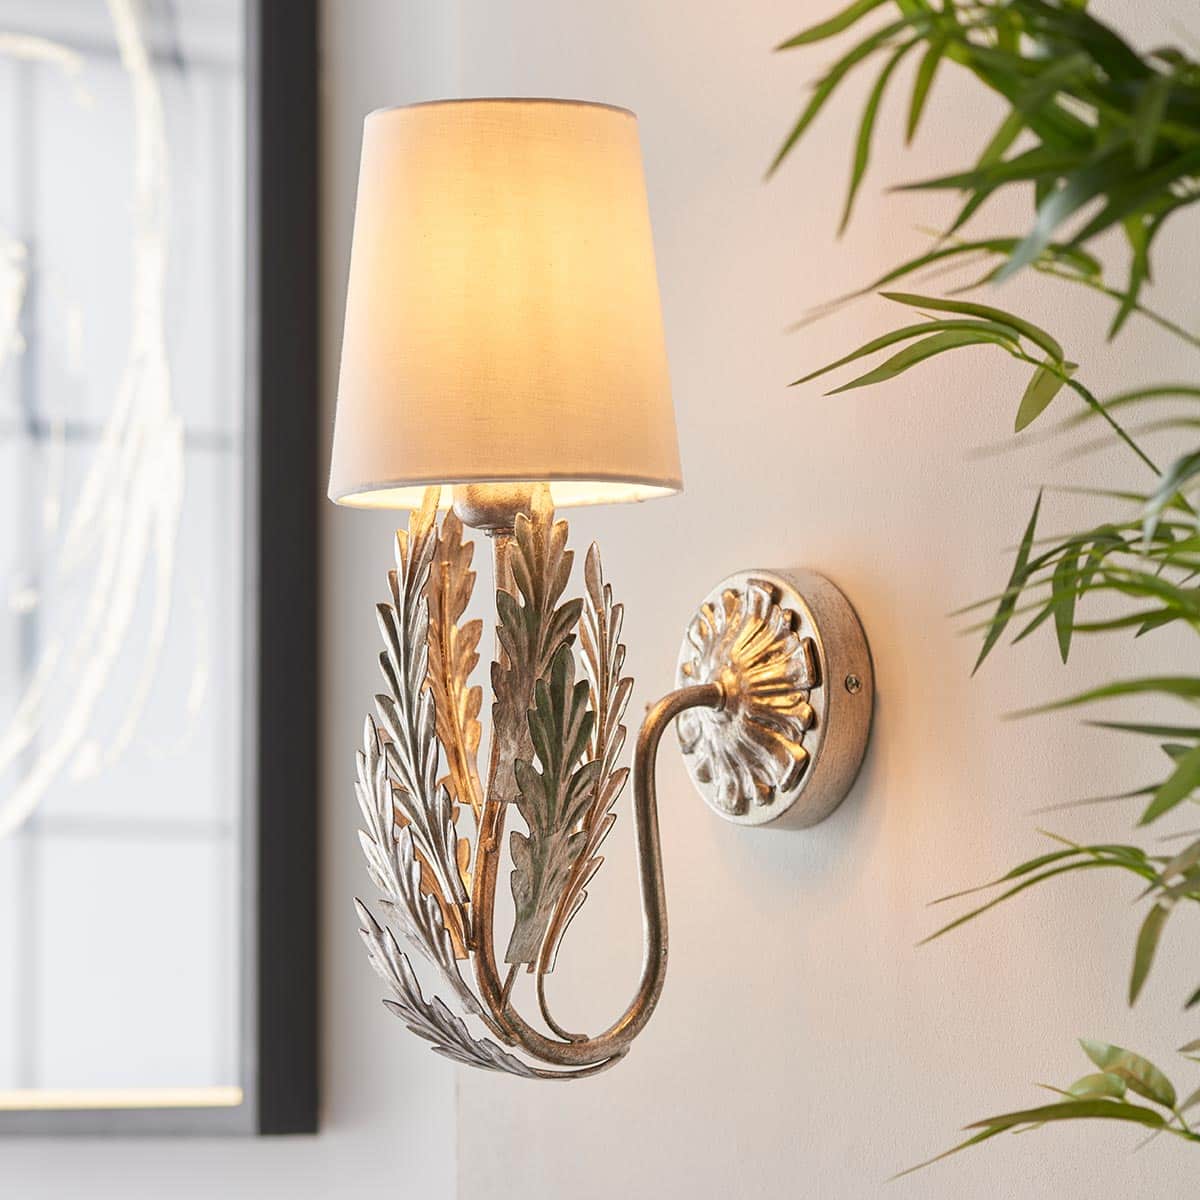 Endon Delphine Floral 1 Lamp Single Wall Light Silver Leaf Ivory Shade